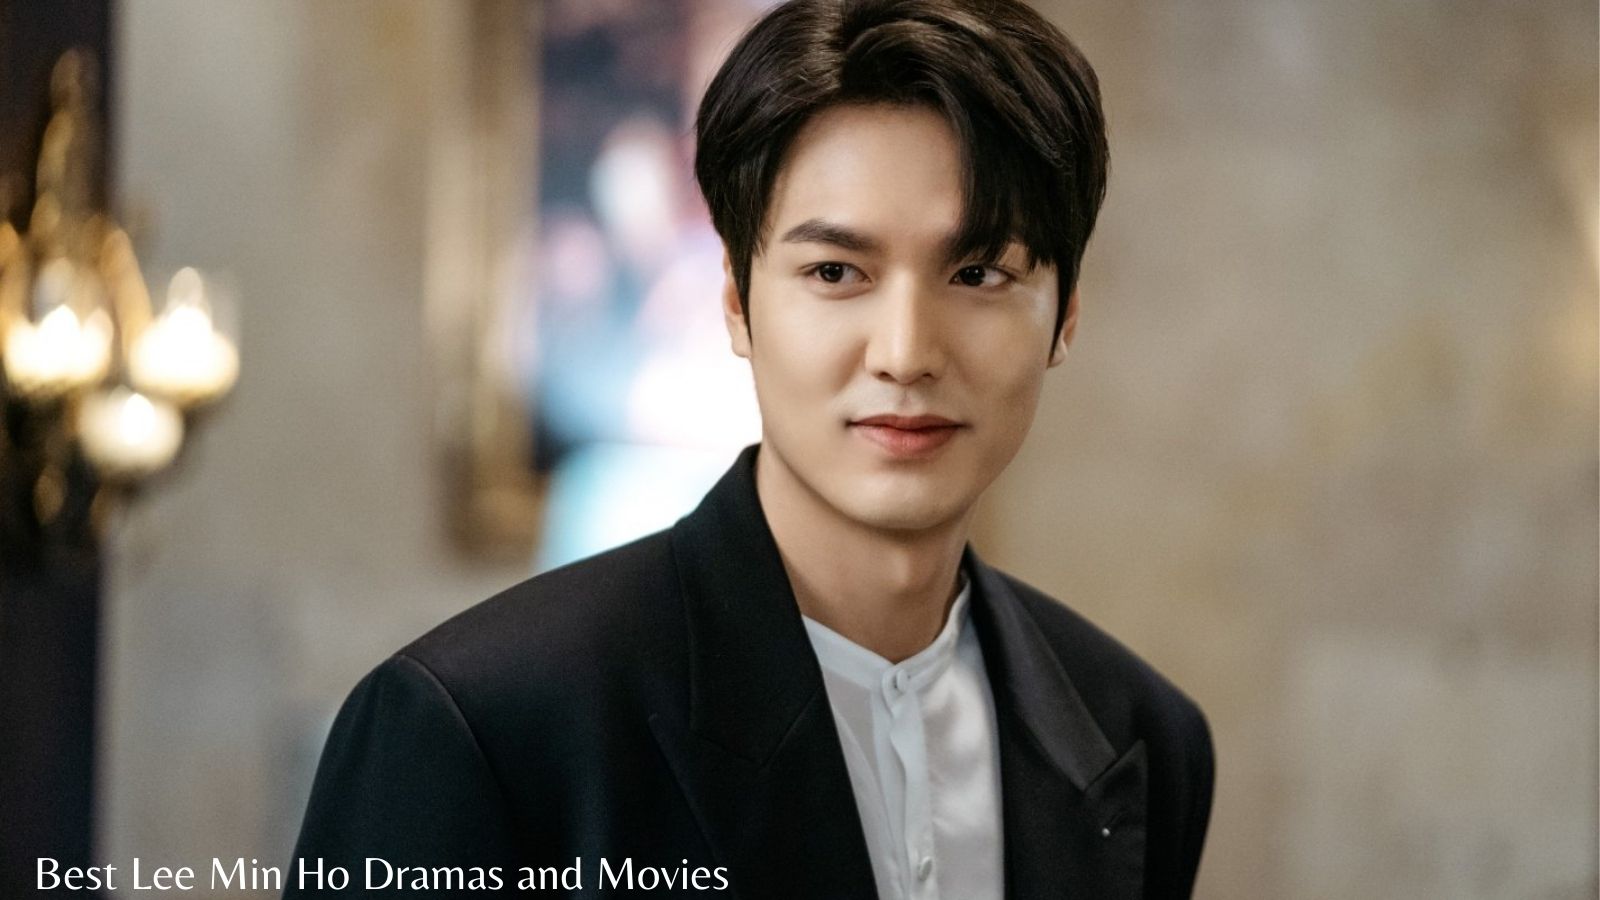 10 Best Dramas And Movies Of Lee Min Ho: From The Heirs To Pachinko ...